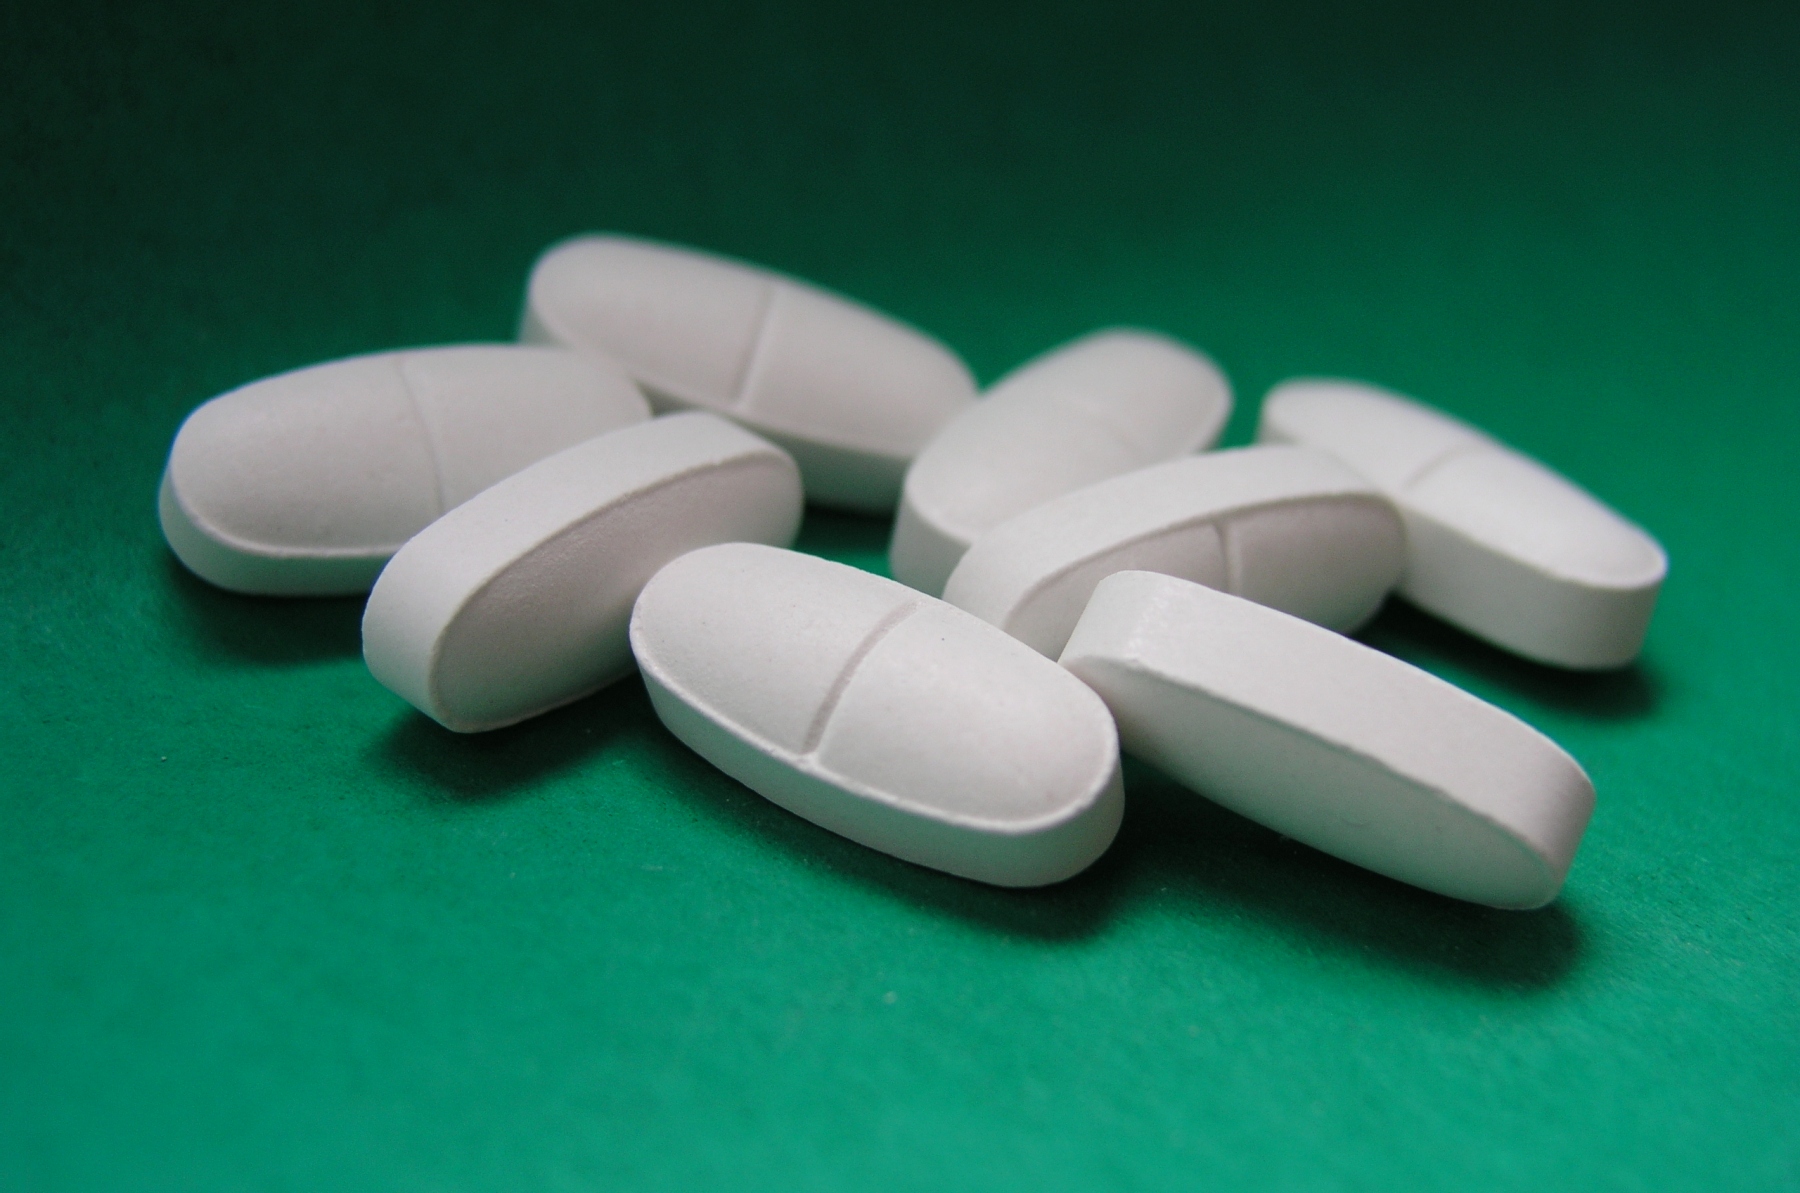 There is an opioid epidemic happening in the US right now. Vicodin use has spiked and people are constantly overdosing. Read about the opioid epidemic here.